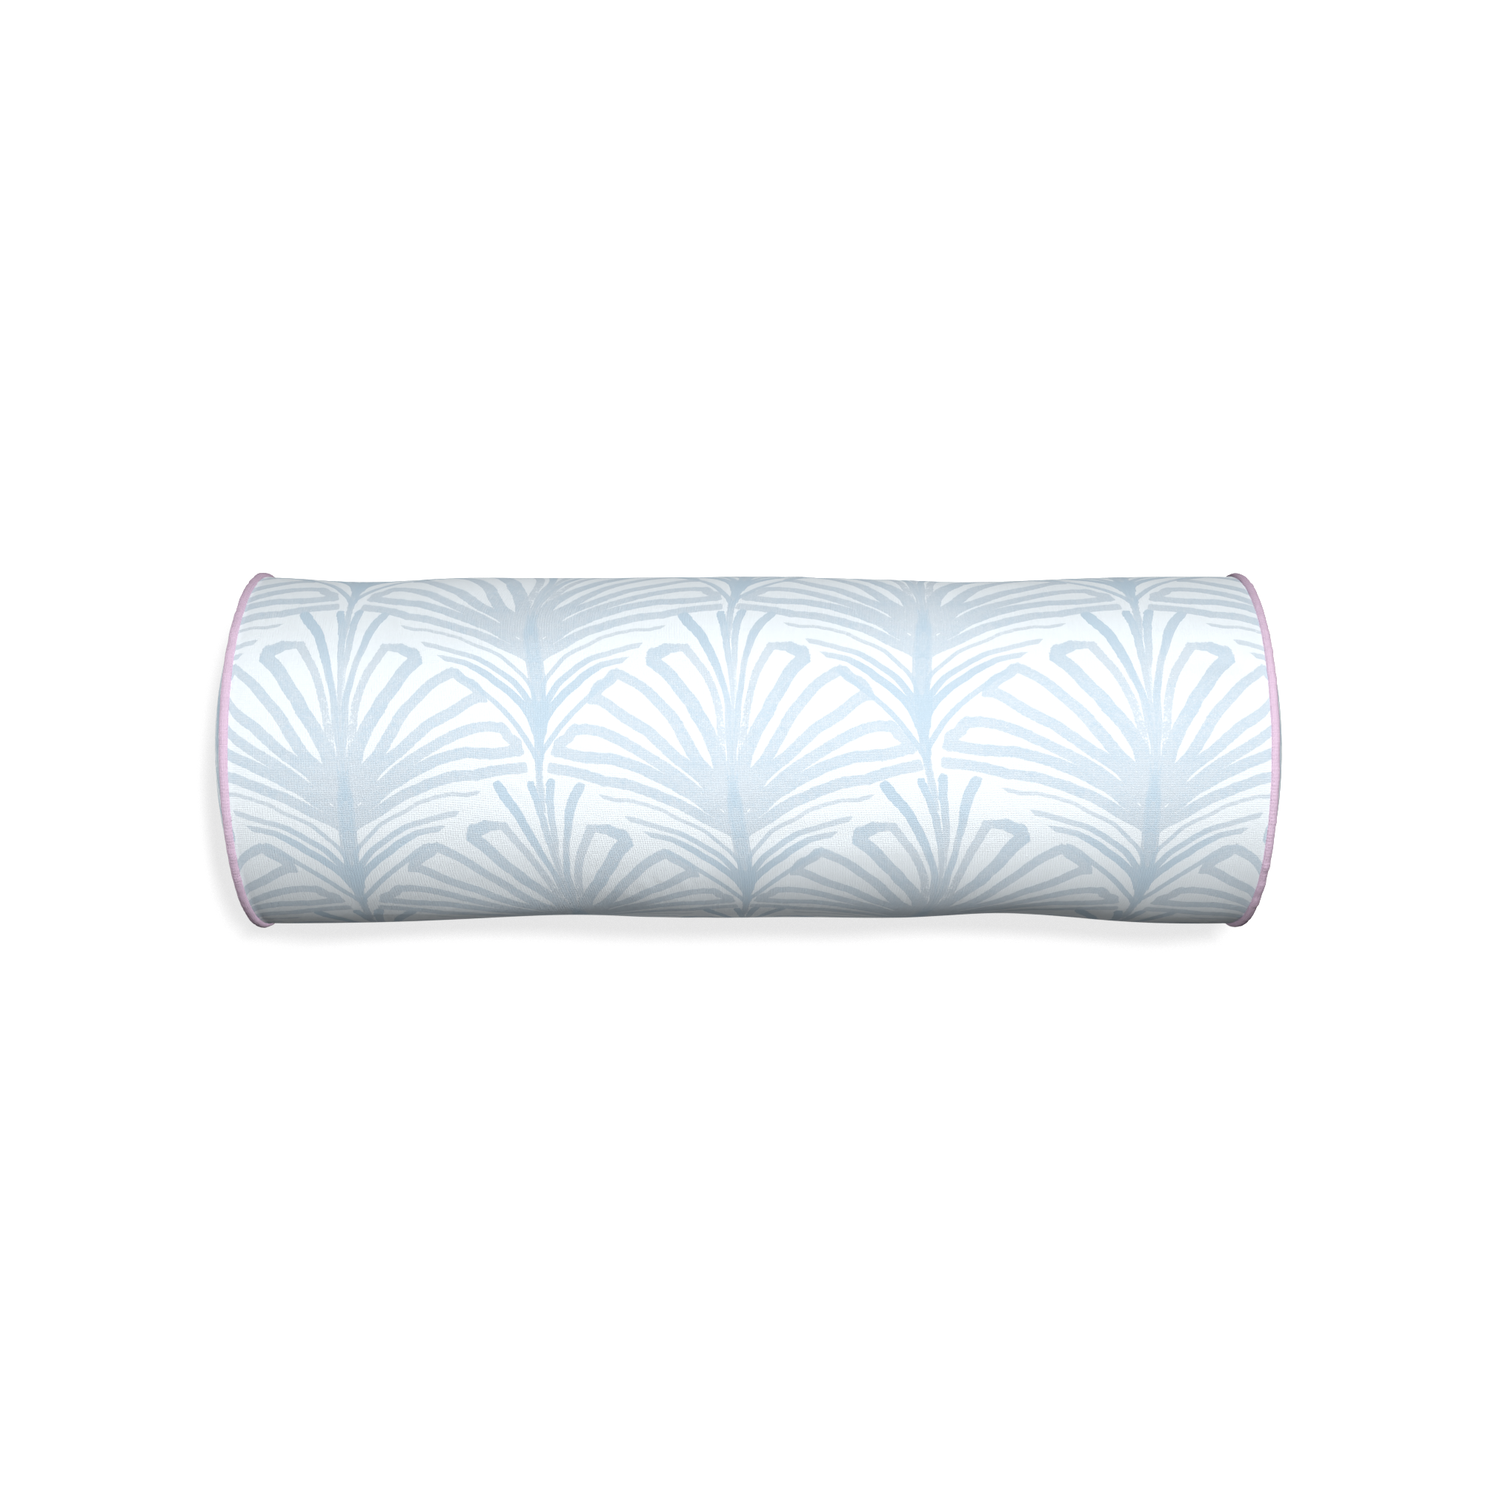 Bolster suzy sky custom pillow with l piping on white background